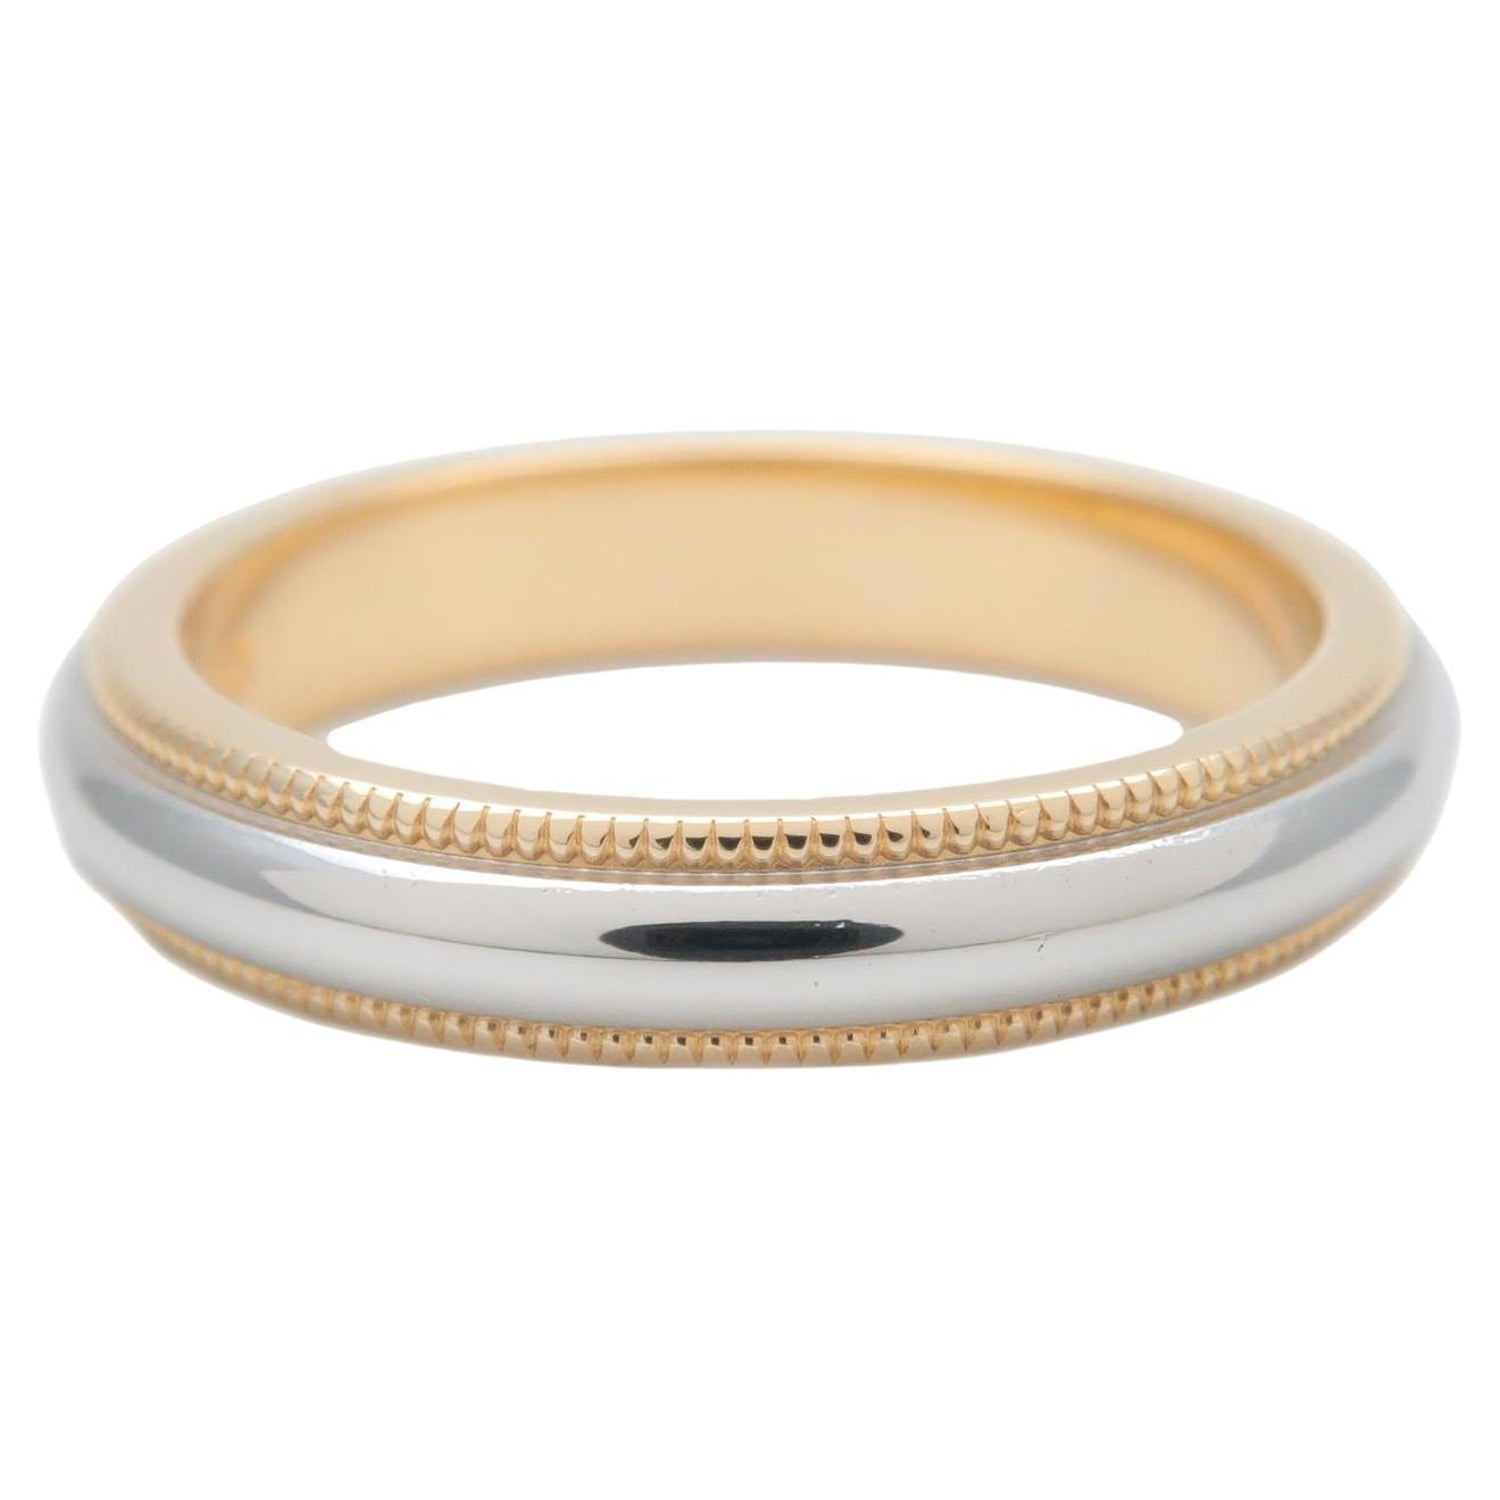 Tiffany Forever Wedding Band Ring in Yellow Gold, 3 mm Wide